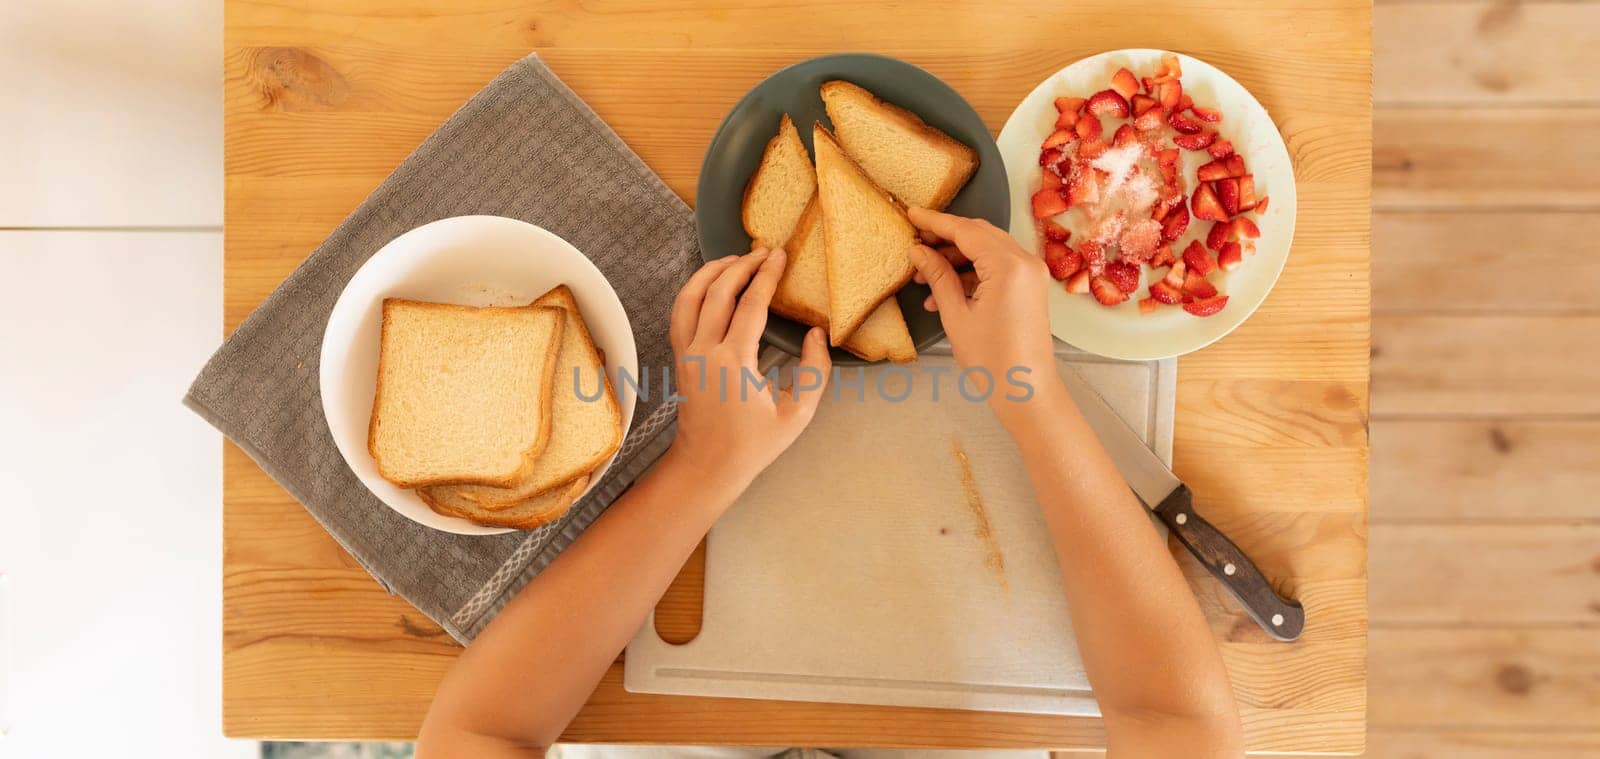 Top view, a woman making cream cheese toast with strawberries for a snack by TRMK